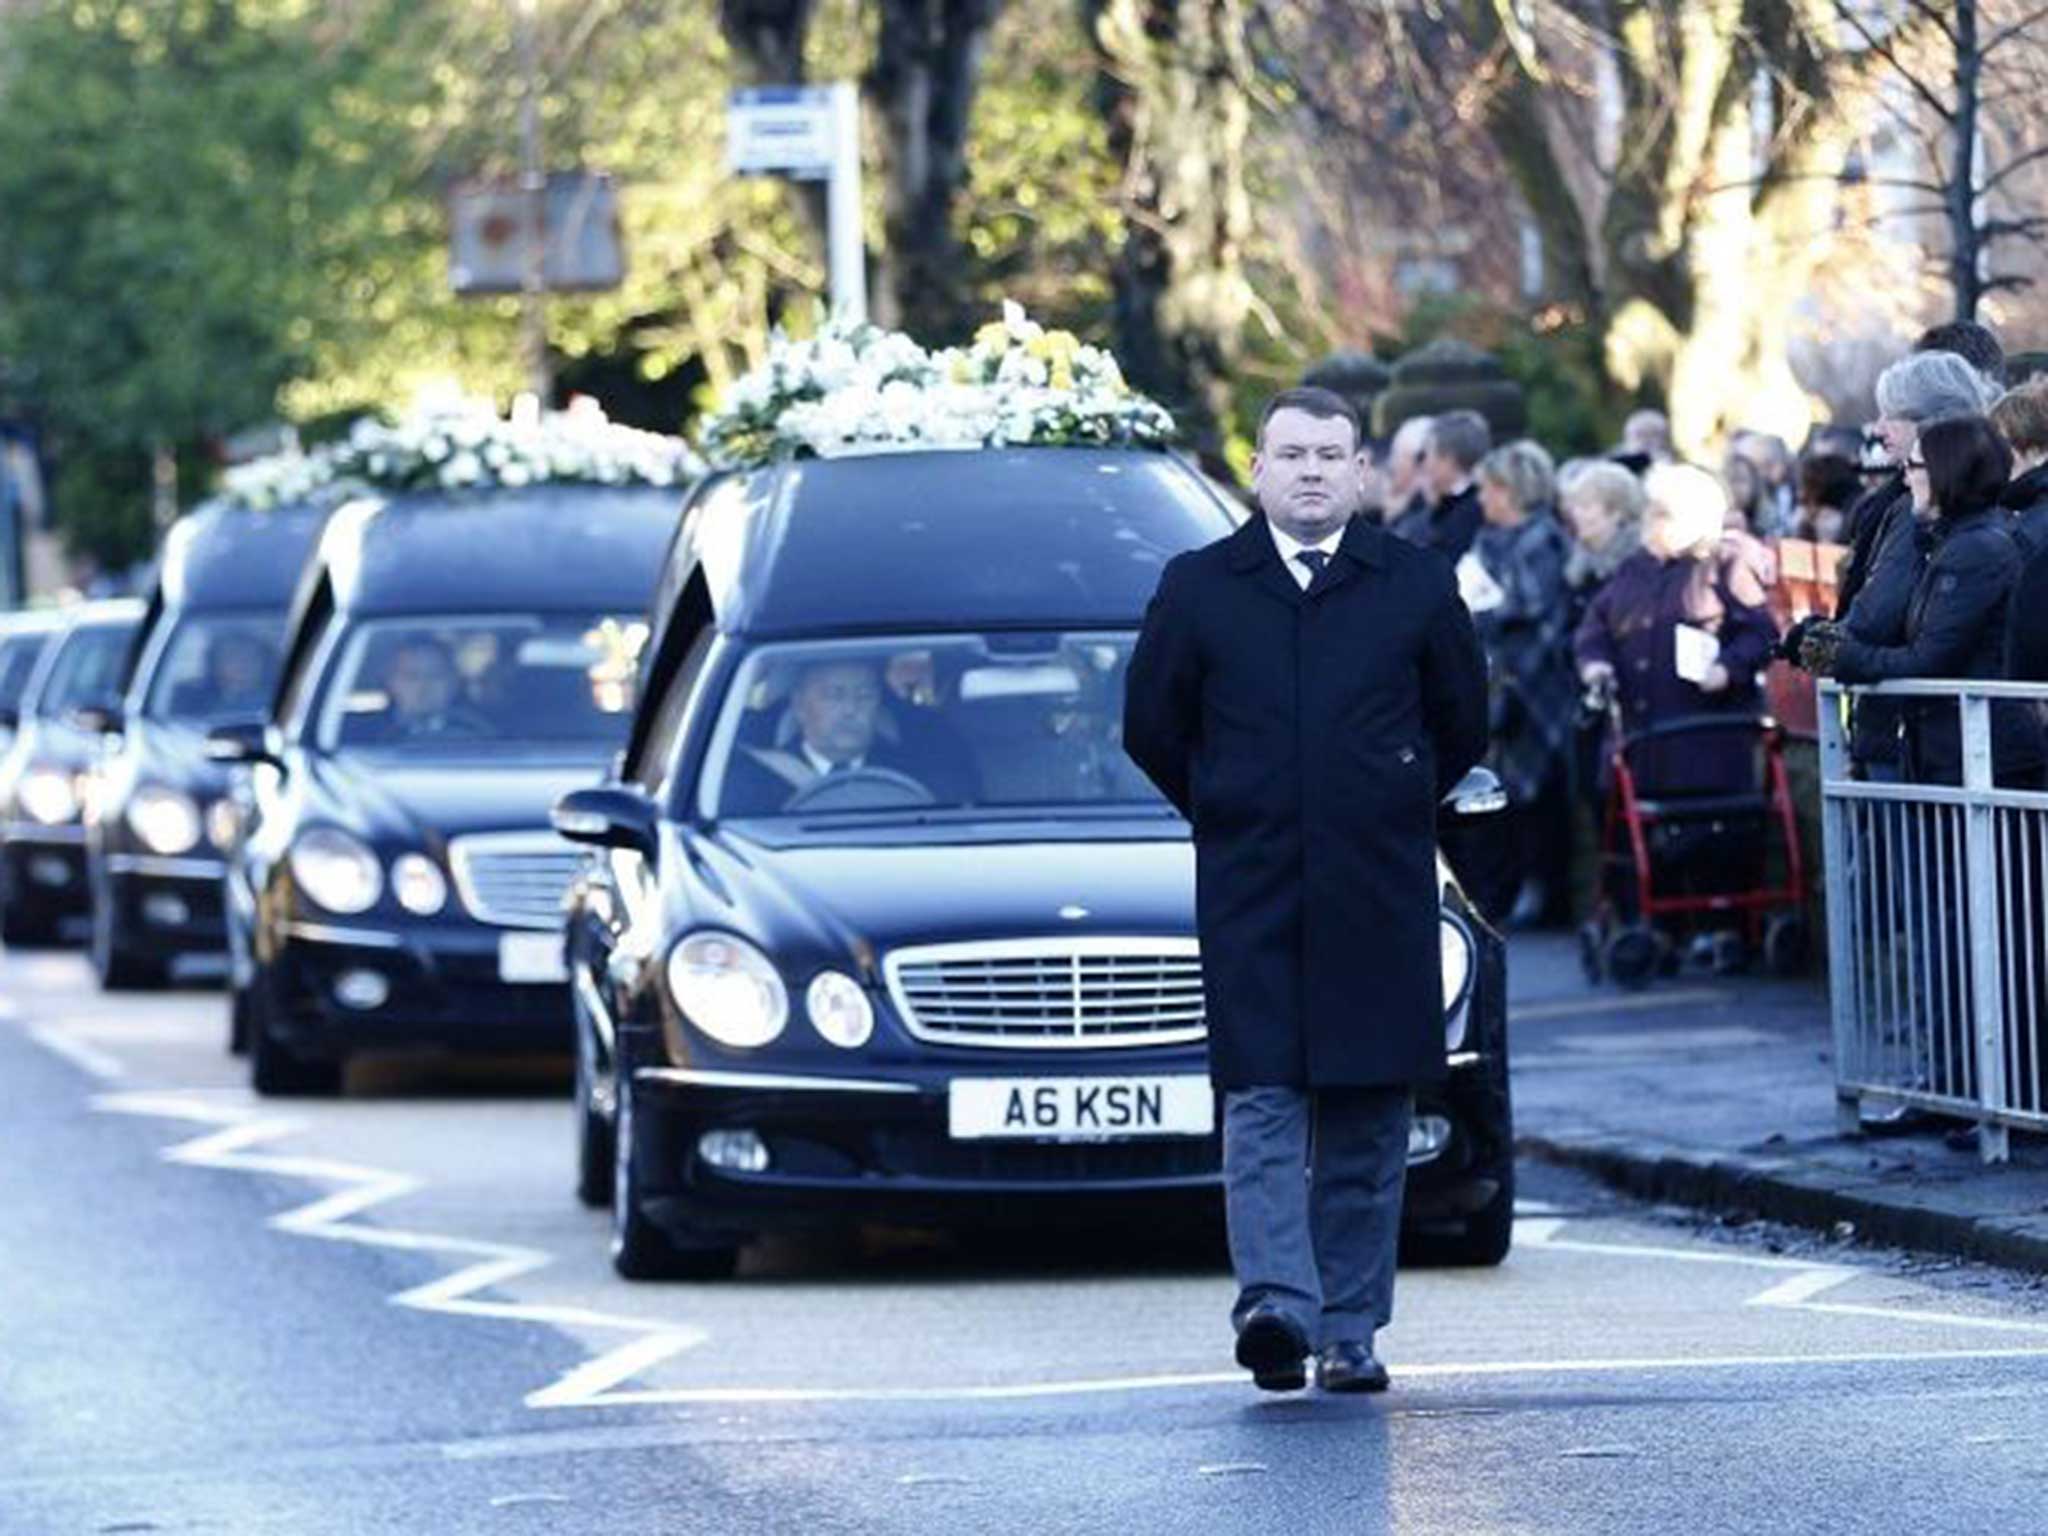 Mourners line the street after the requiem mass for Erin McQuade, Lorraine Sweeney and Jack Sweeney